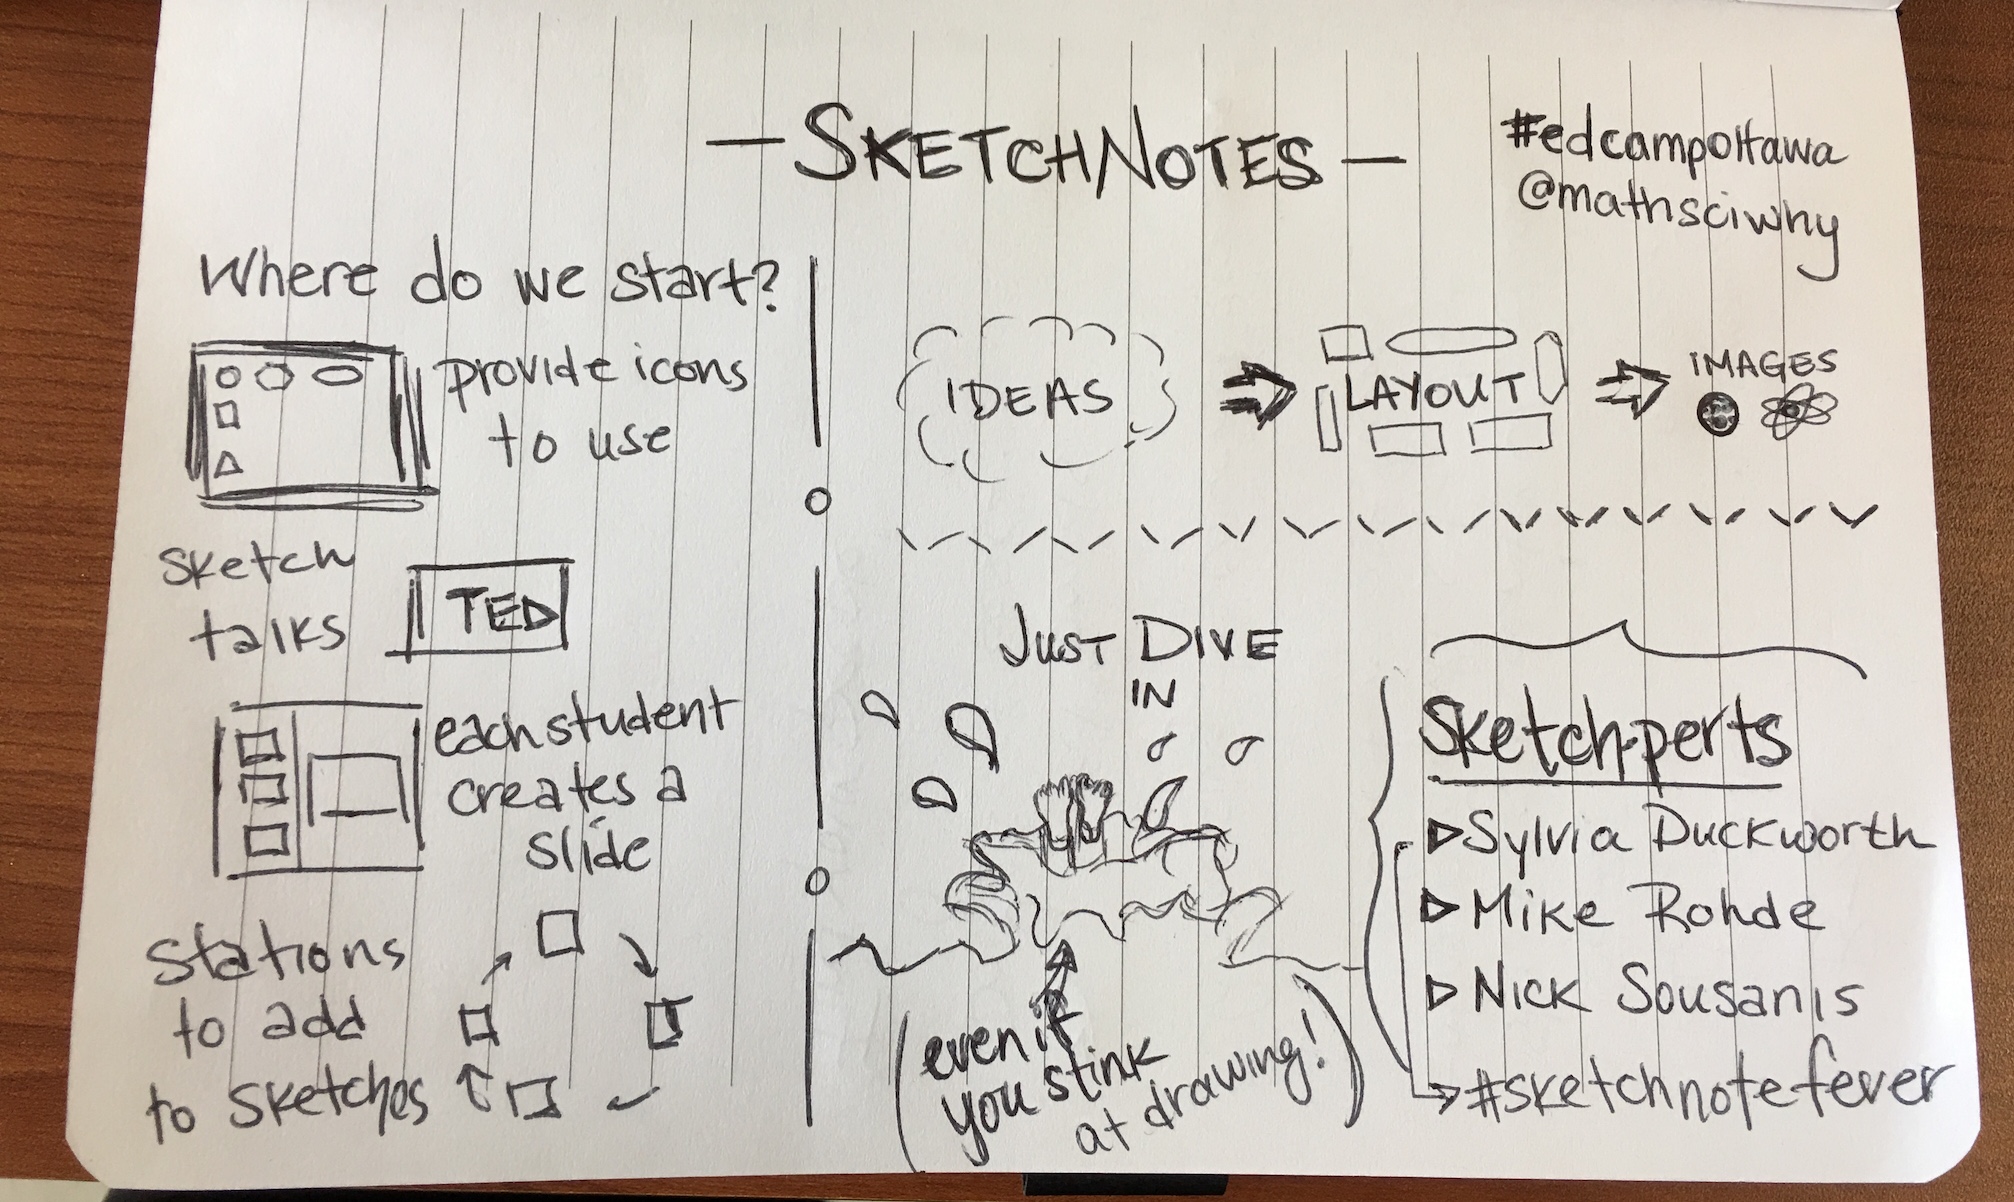 A sketchnote about Sketchnotes. Includes: ideas about where do we start; the importance of ideas, layouts and images; a list of sketchperts, and a prompt to just dive in